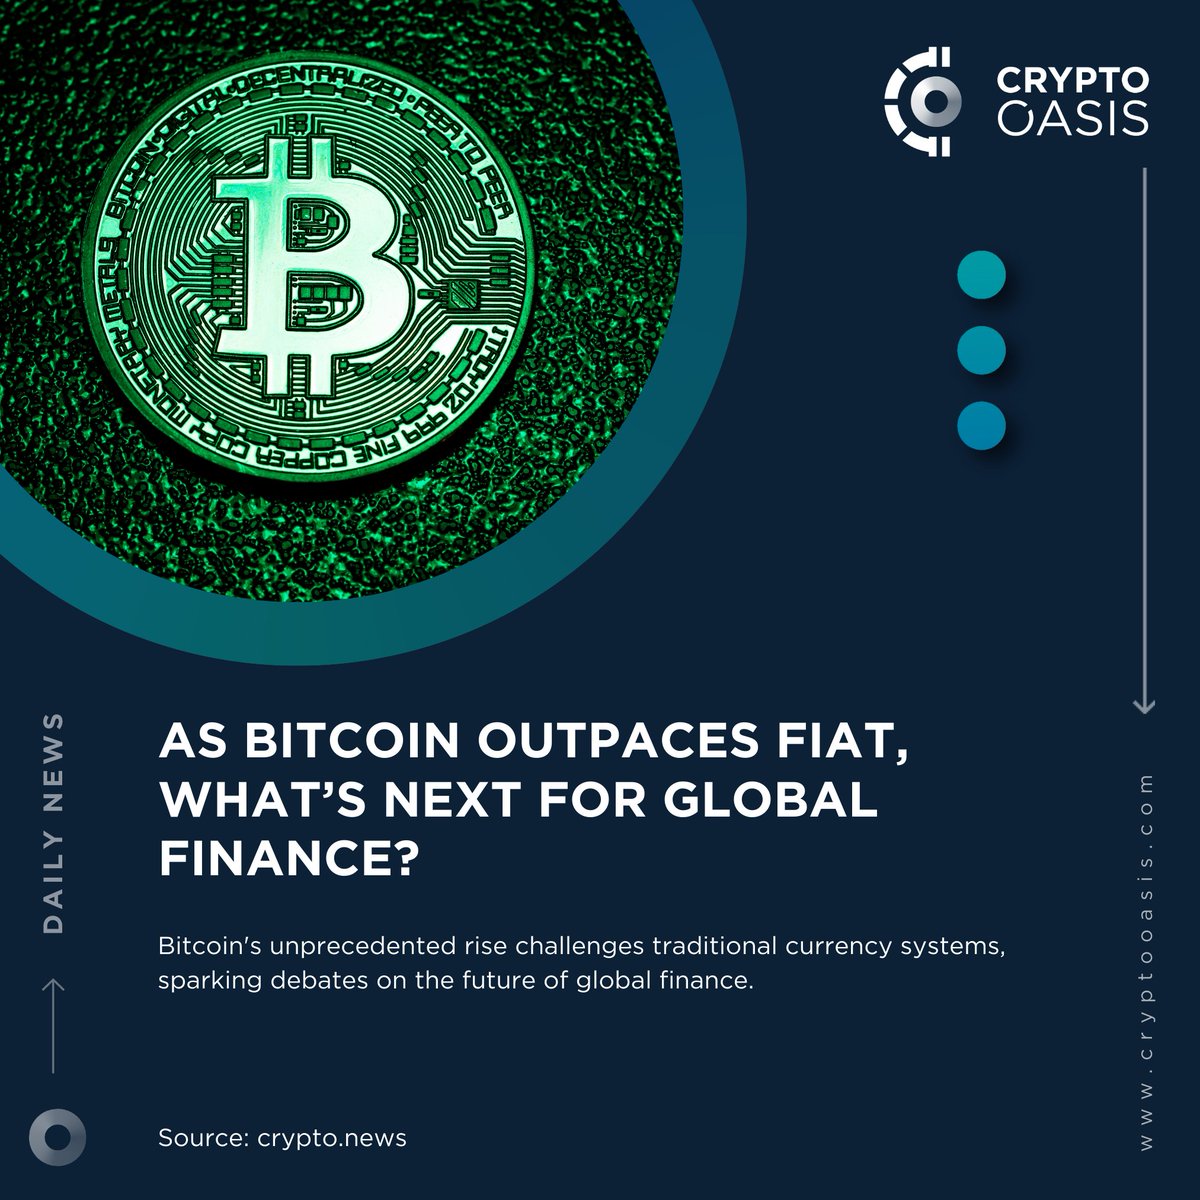 📢 Crypto Oasis Daily News As #Bitcoin outpaces fiat, what’s next for global finance? Bitcoin's unprecedented rise challenges traditional currency systems, sparking debates on the future of global finance. tinyurl.com/yc56j9m8 @itscrypto_news